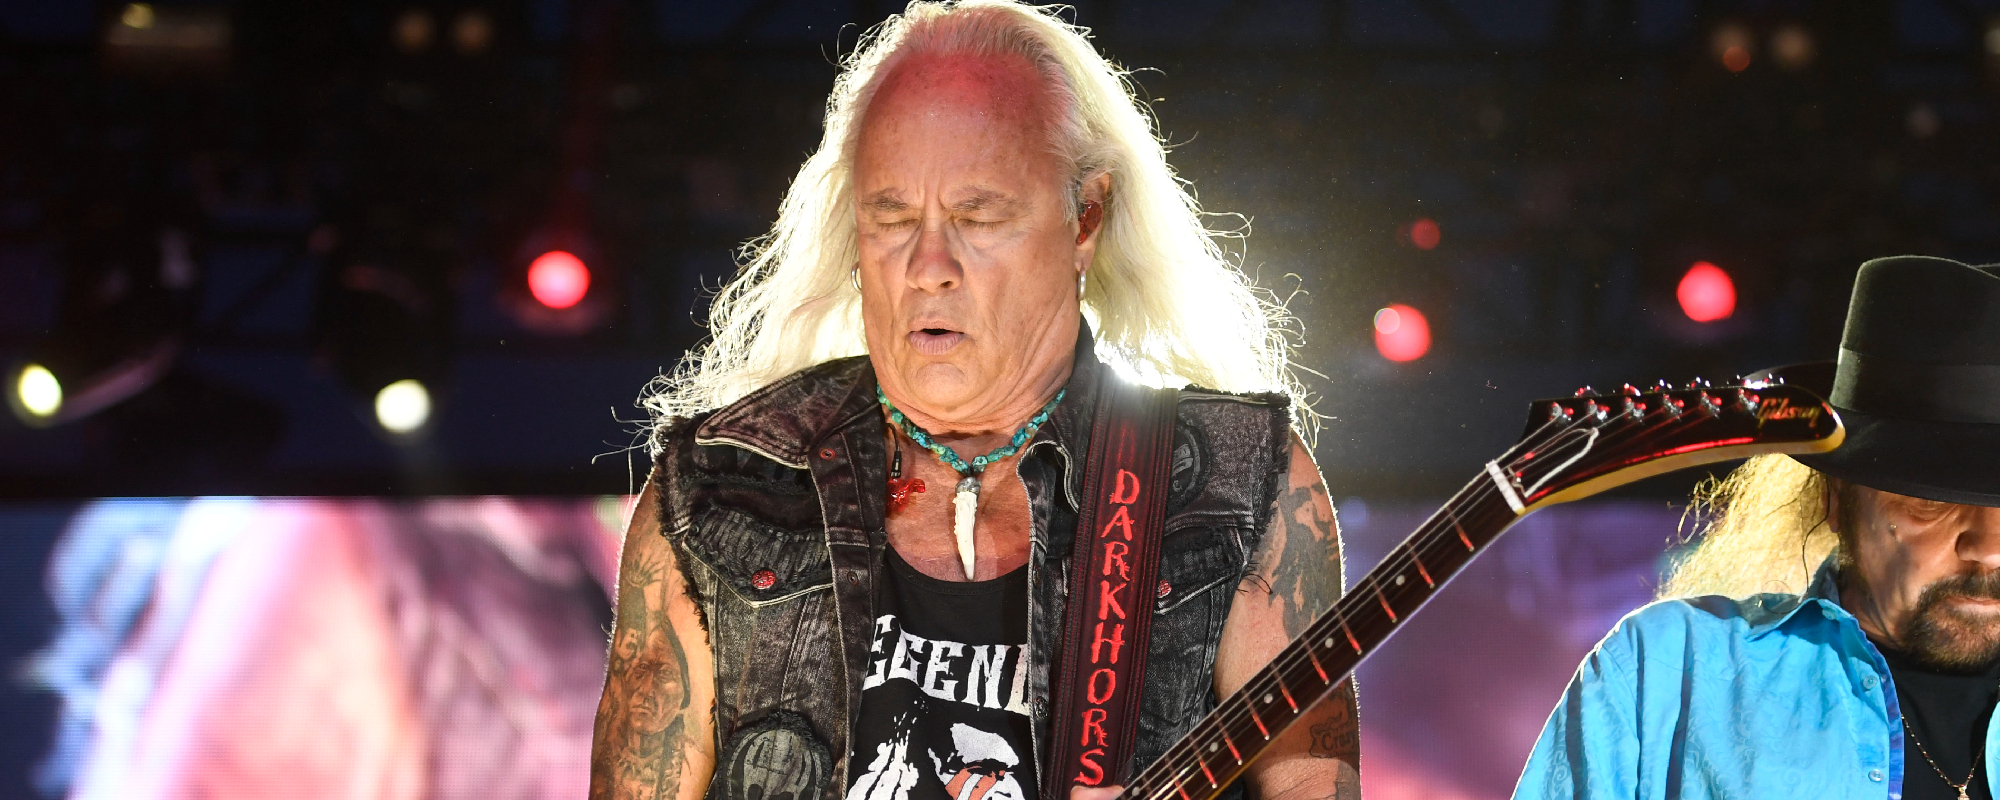 Rickey Medlocke Lashes Out After Some Suggested Lynyrd Skynyrd Is Nothing More Than a Tribute Band